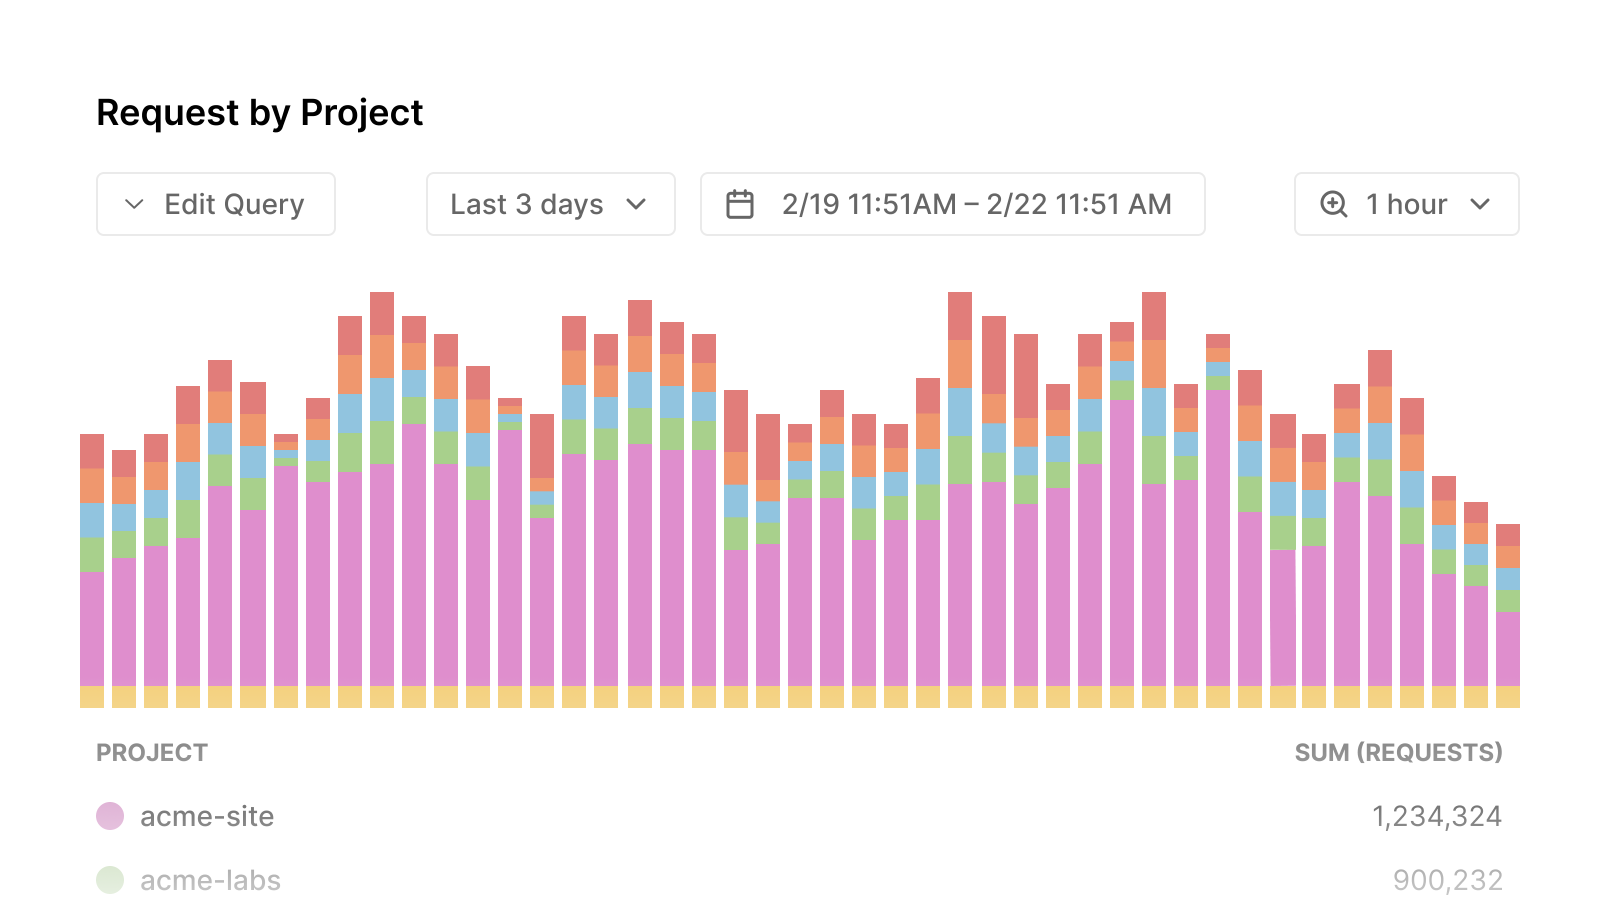 Cover for Monitoring is now available to view traffic and performance data for improved observability 